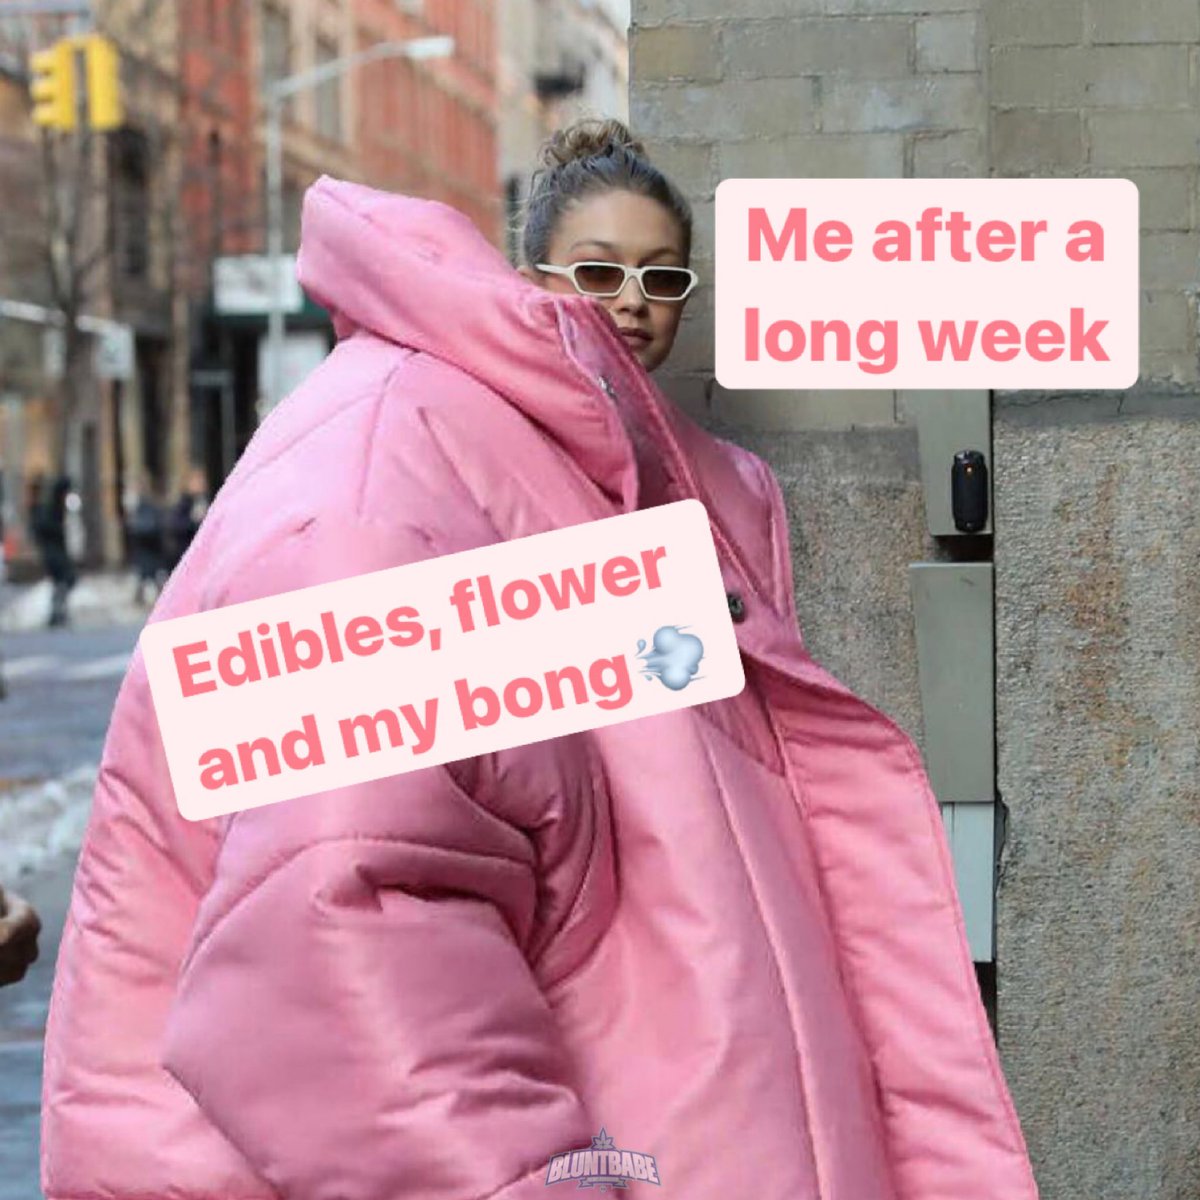 Weekend plans: #selflove 💕
Relax, Recharge, Refocus 

Treat yourself to something nice 🙌🏻
Remember to use code:
Vday15 to save 15% 💕

#saturdayvibes #saturdaze #RGV #Flowers #selfcare #cute #girlyaesthetic #meme #cannabisfashion #cannabisculture #pink #wiw #womenofcannabis